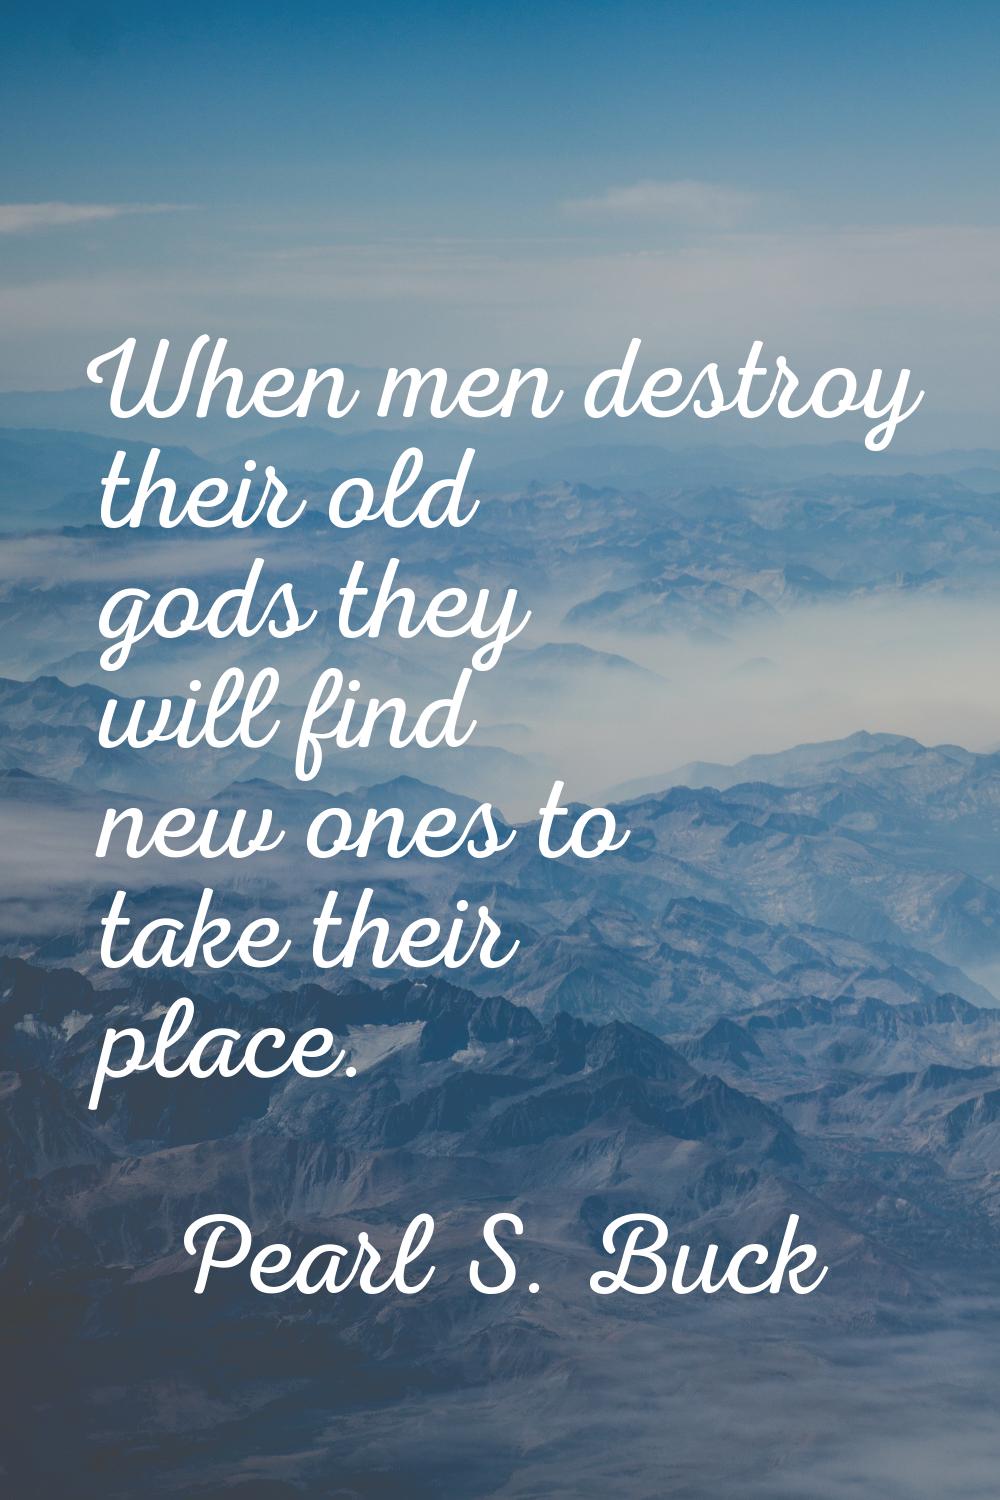 When men destroy their old gods they will find new ones to take their place.